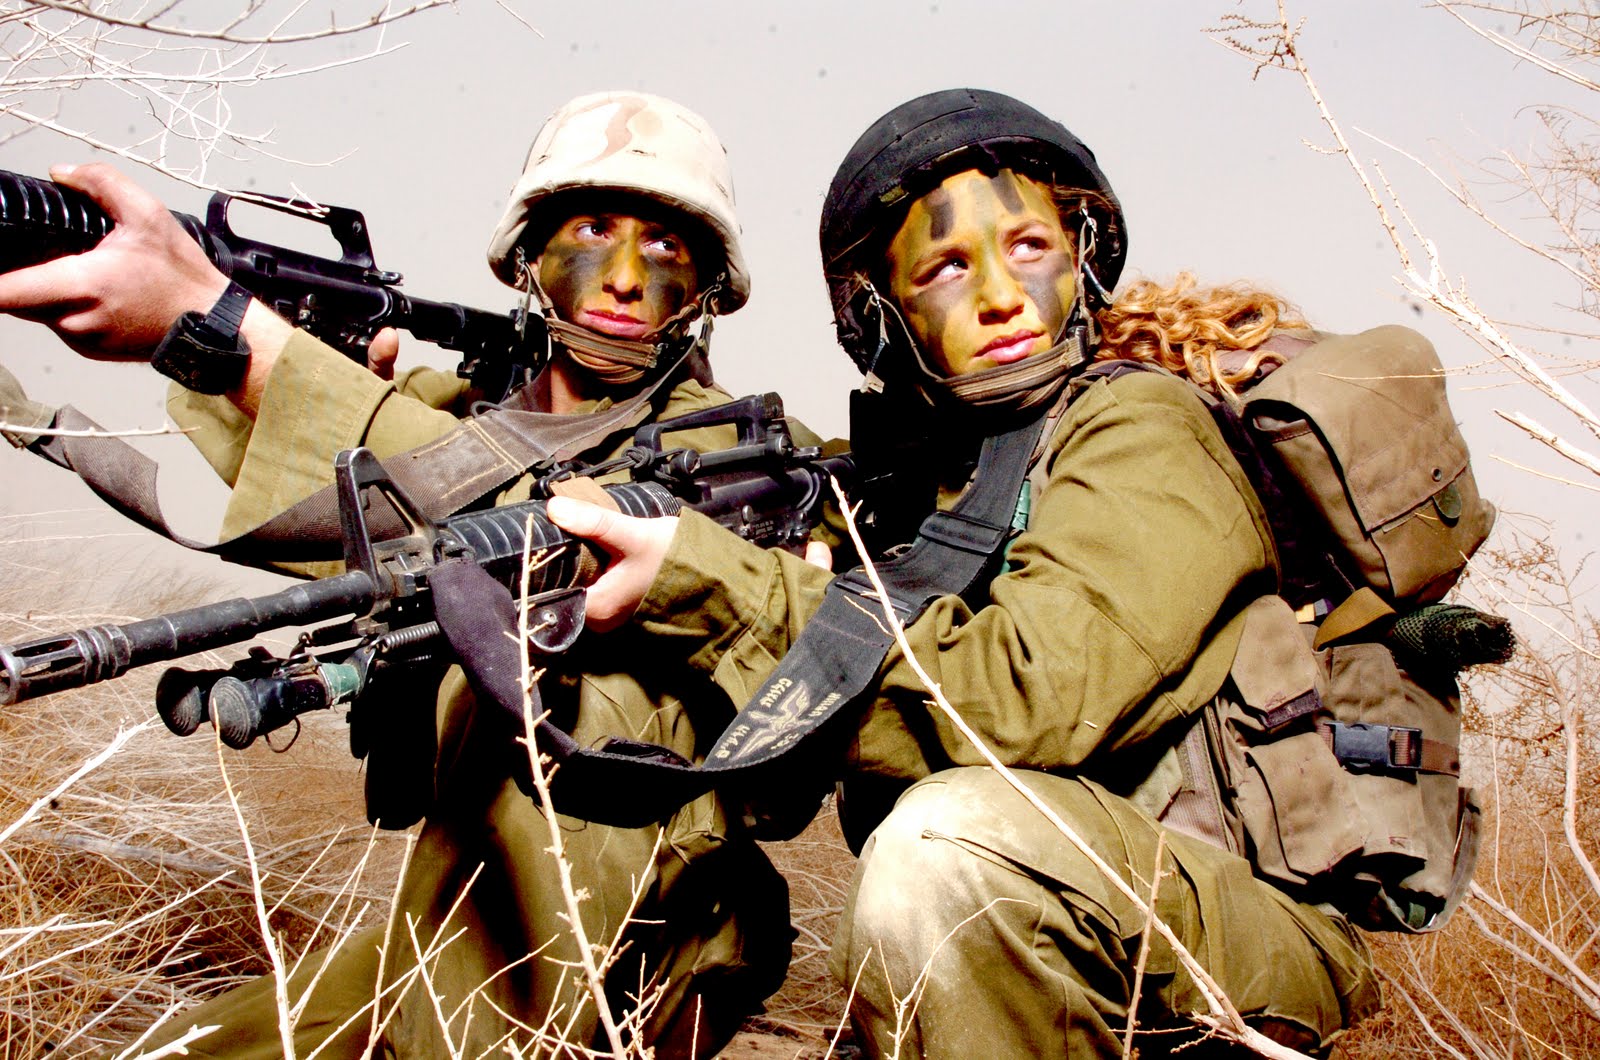 Israeli+women+army+pictures